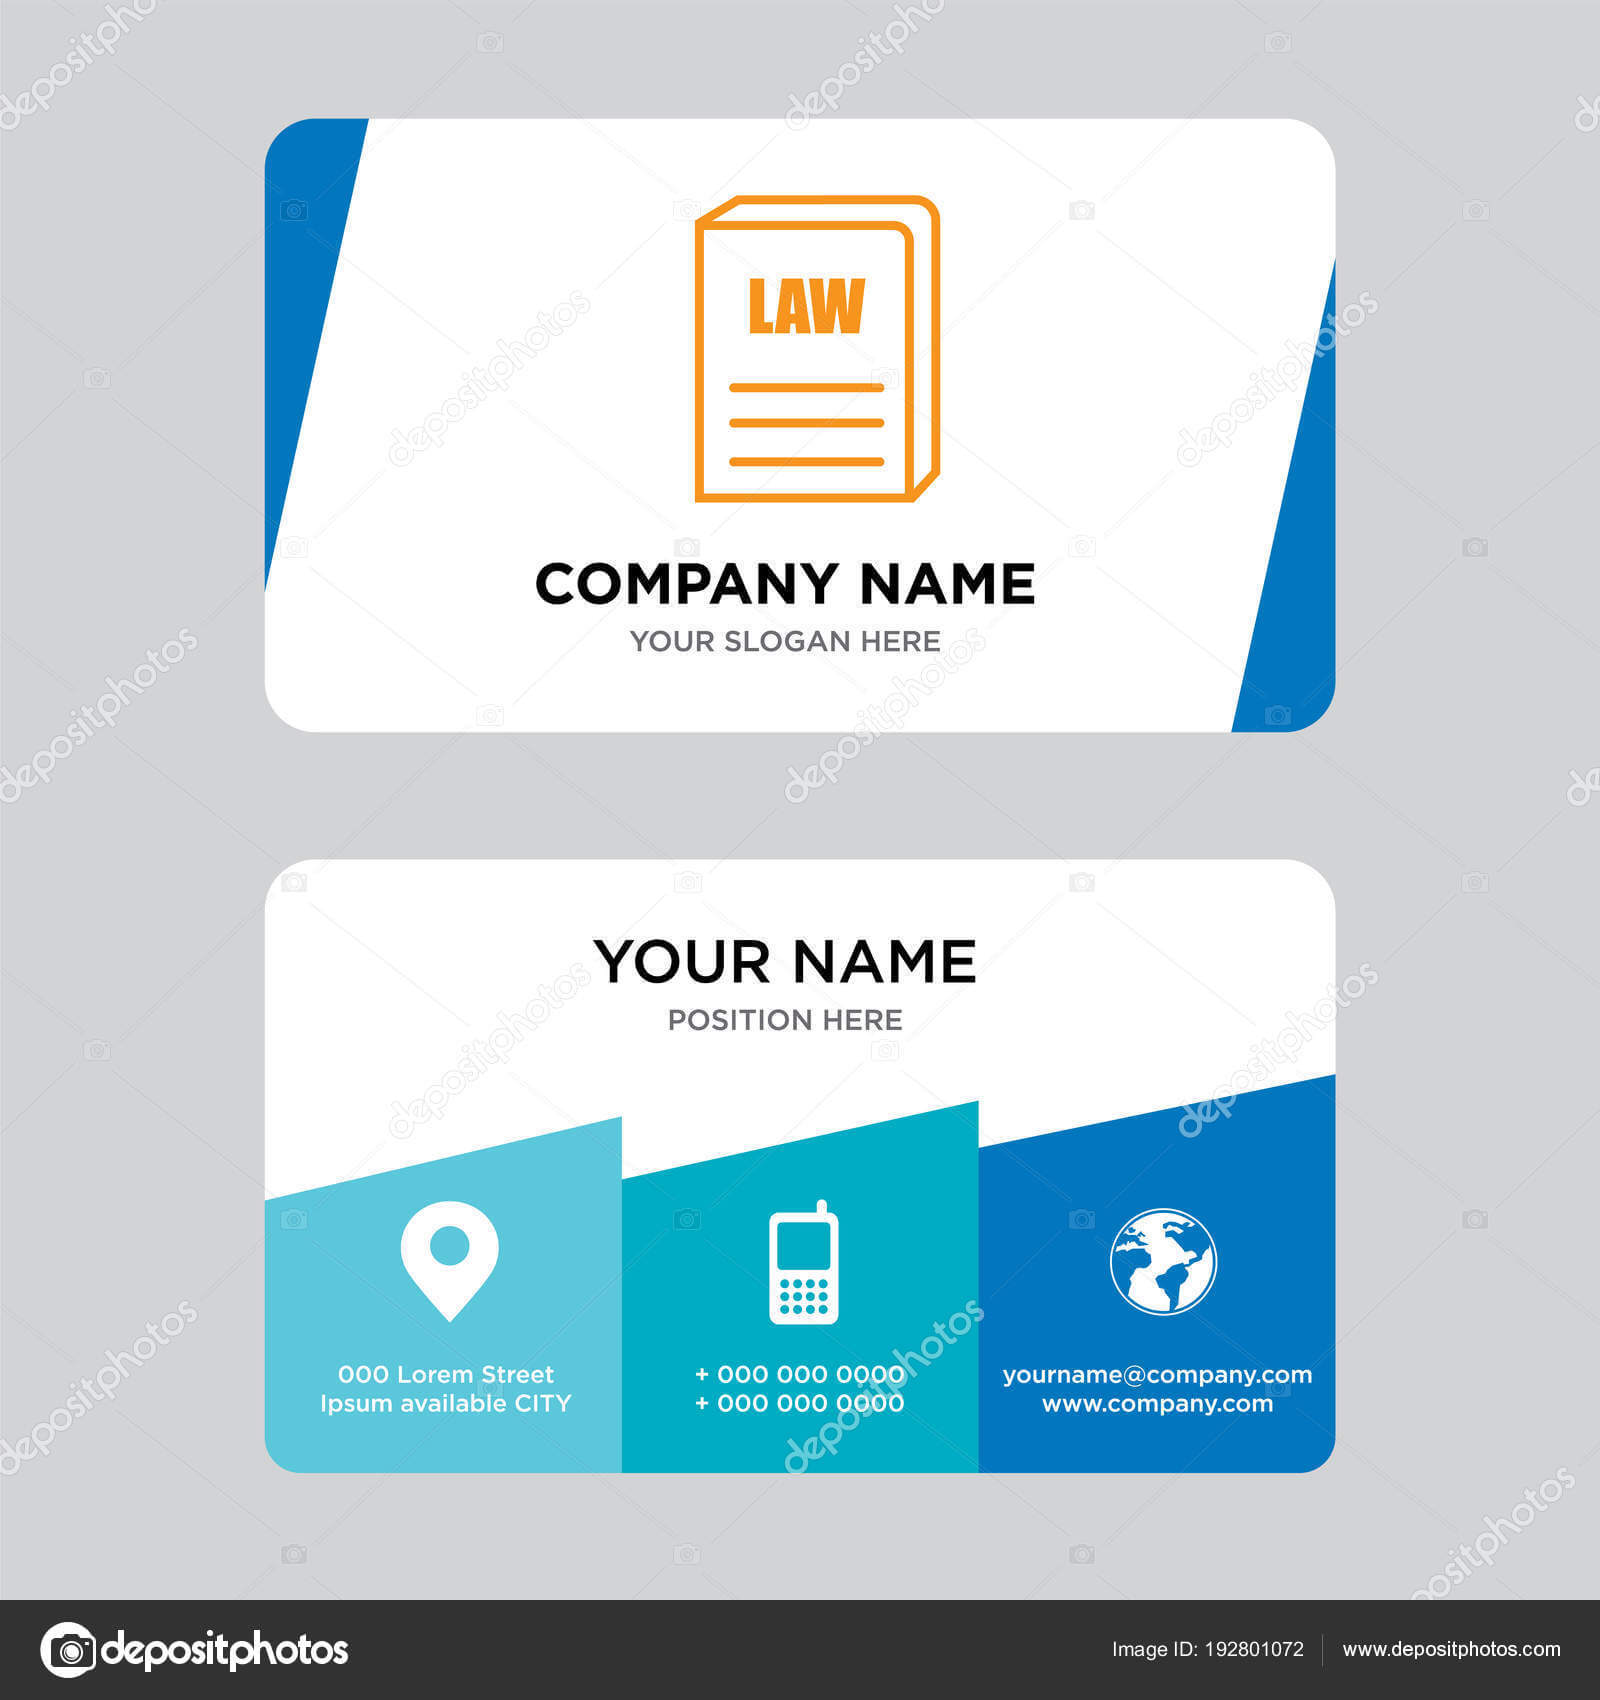 Law Business Cards Templates Free Emory Pictures Of The Best Intended For Legal Business Cards Templates Free